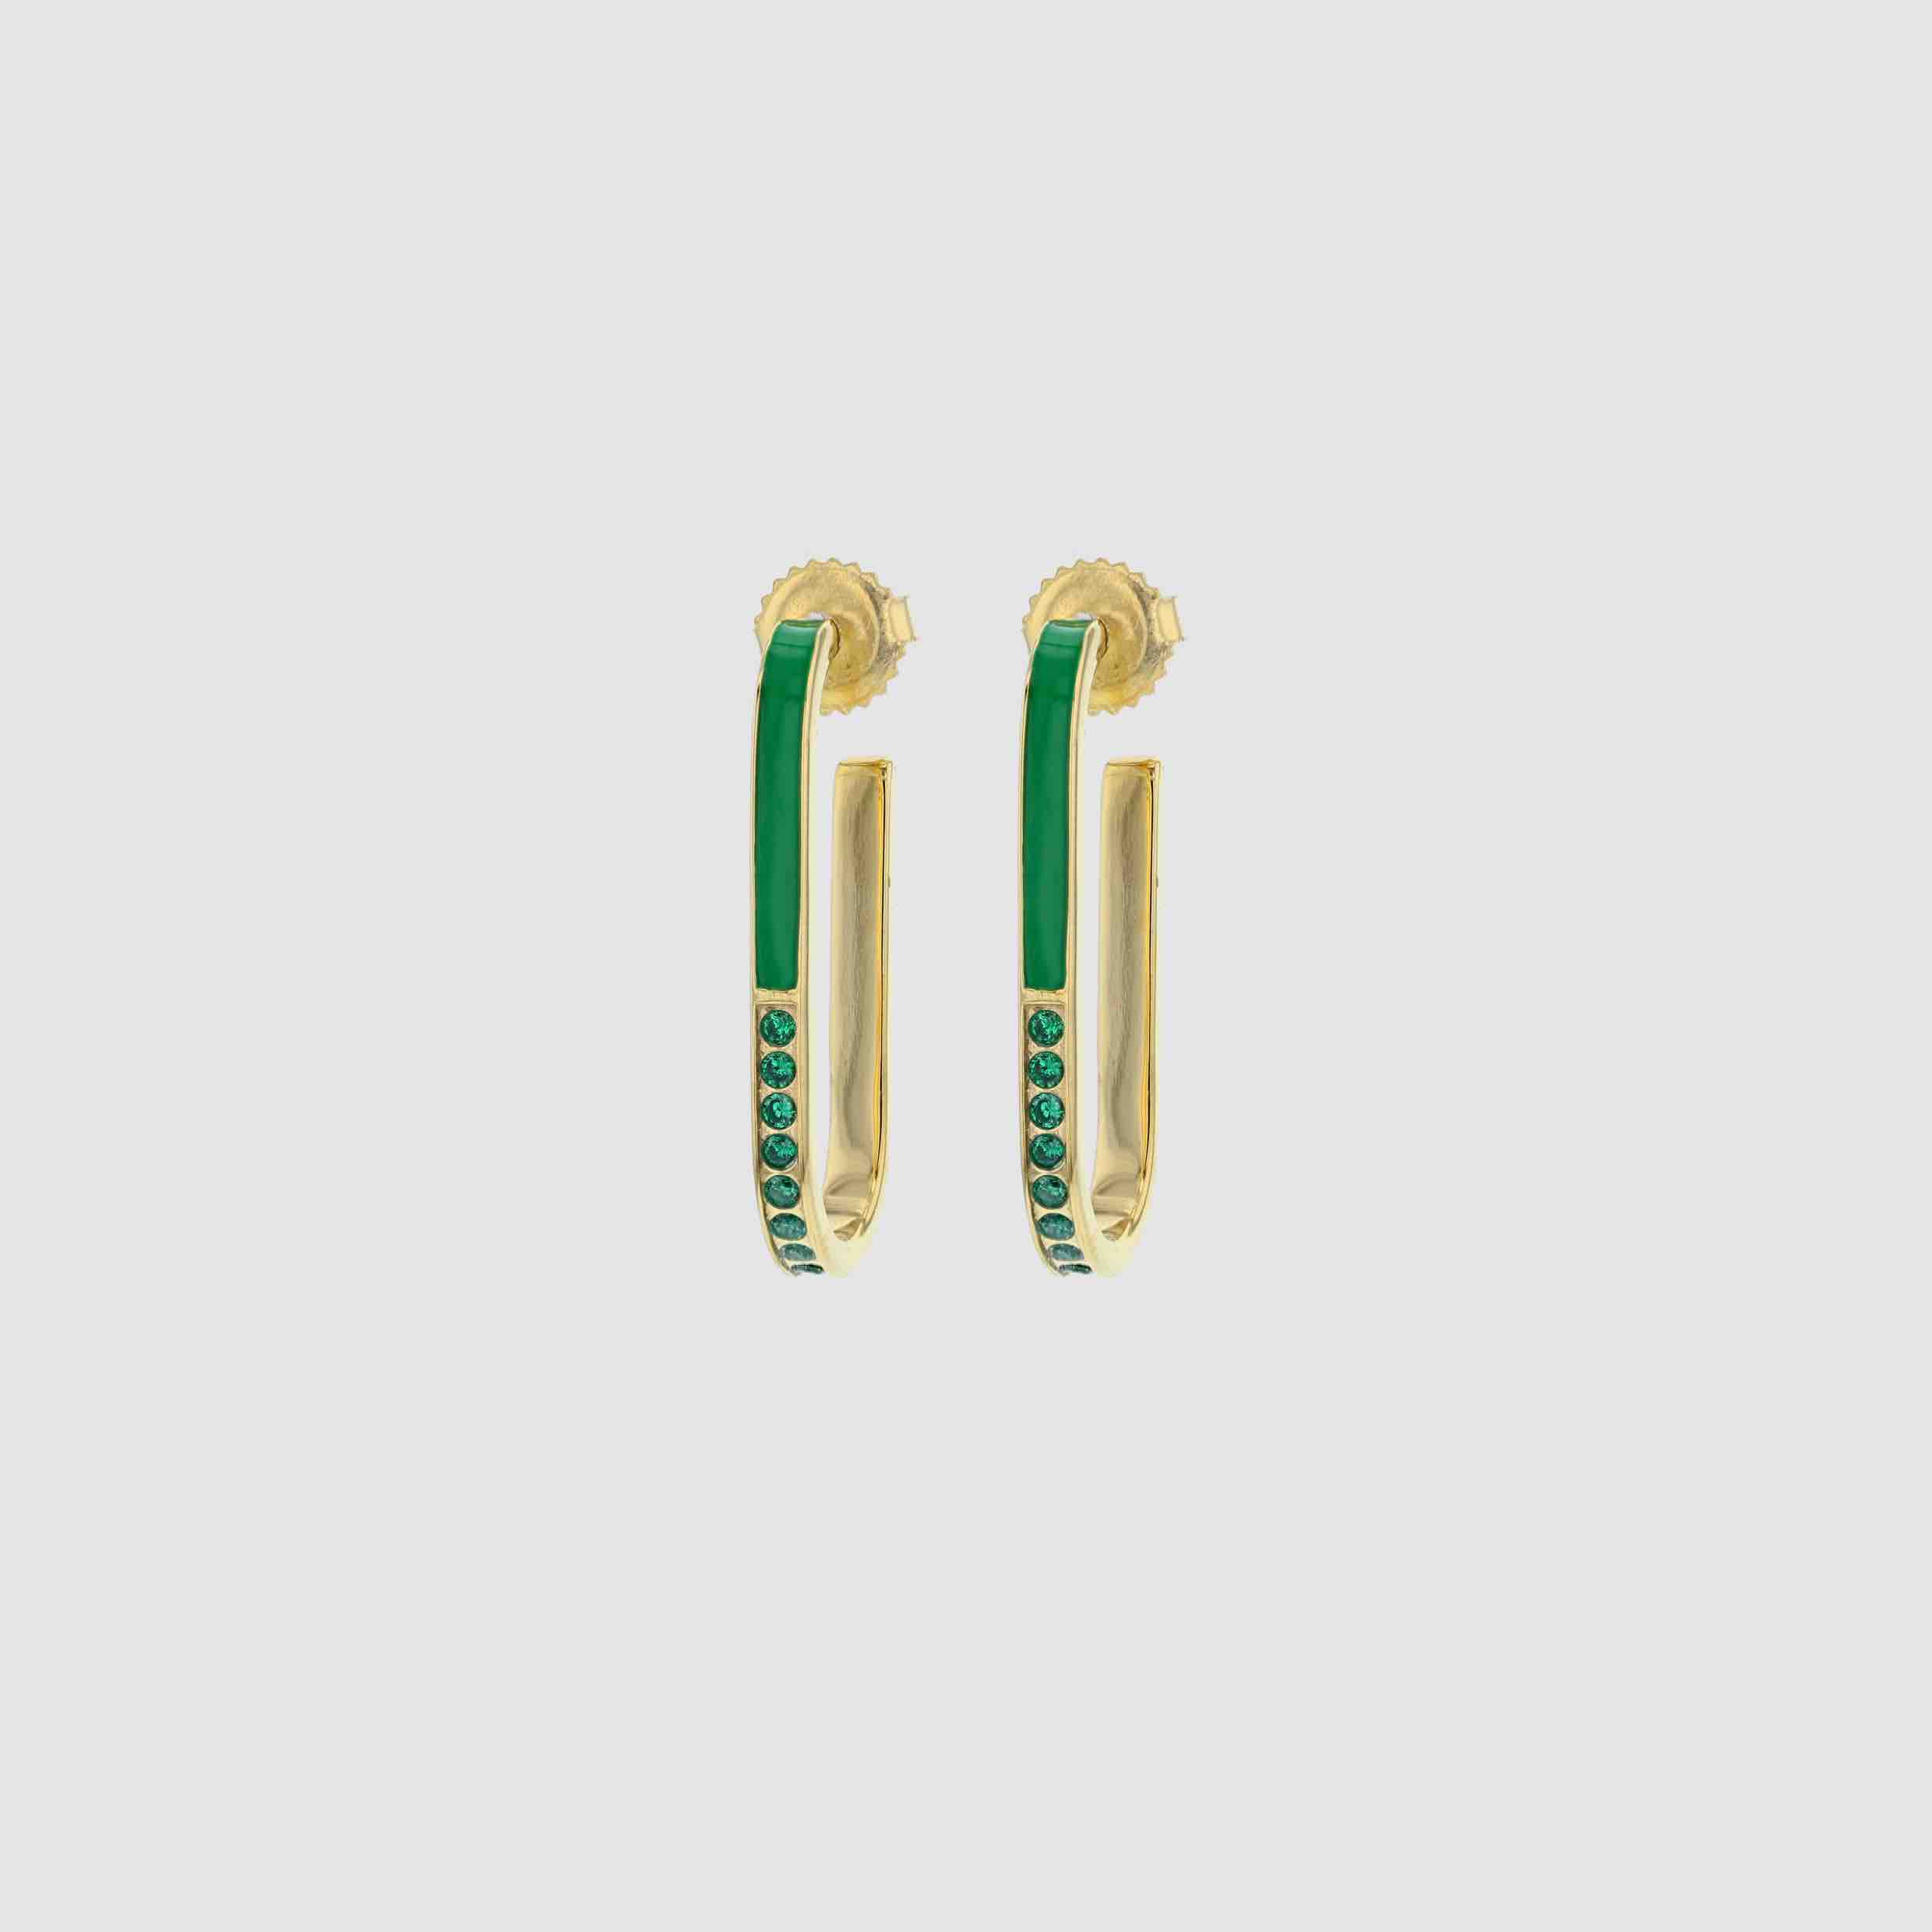 Flash earrings green from Ray collection. Made in recycled silver. Norsk design laget i sølv.